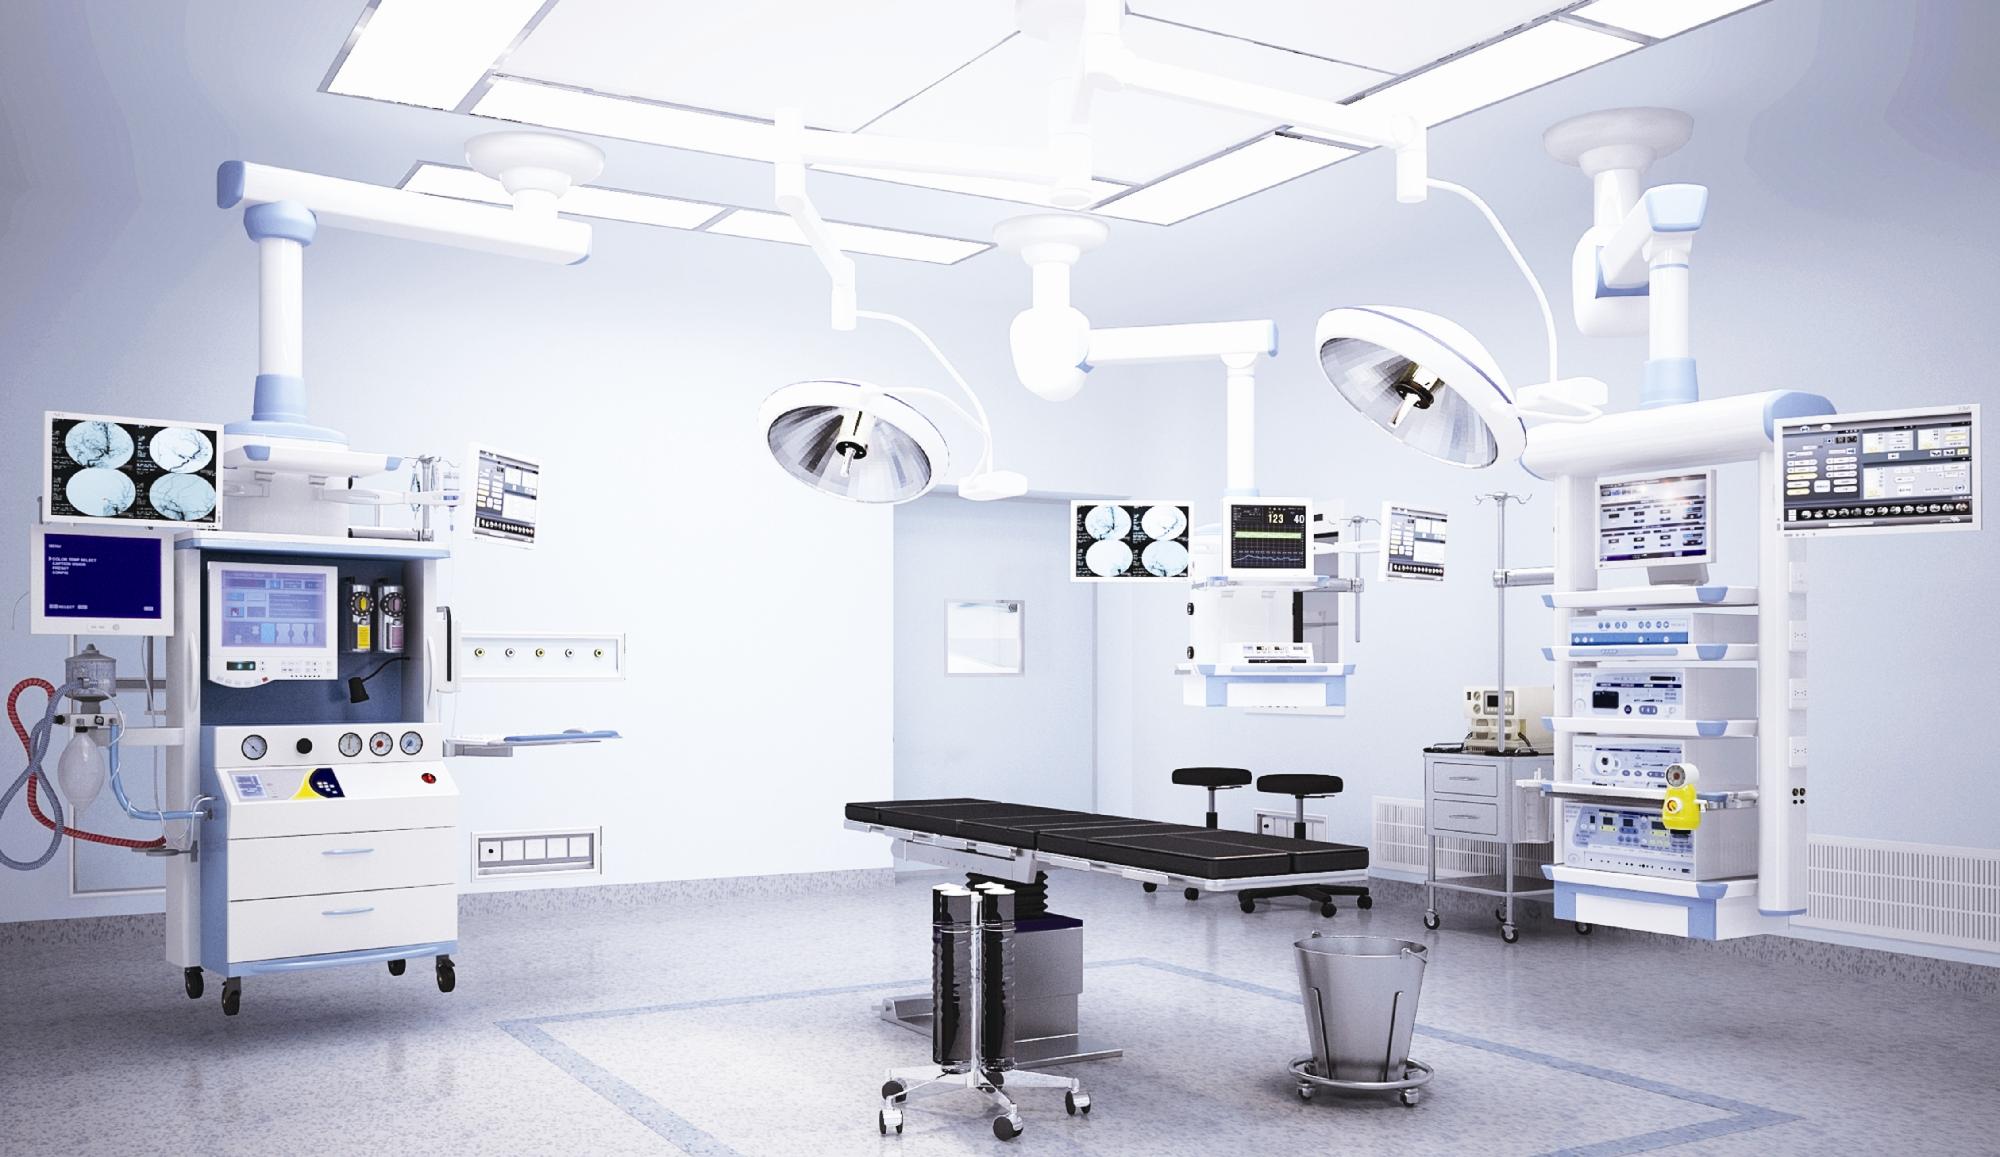 >To improve the quality of purification engineering in operating room, we should start from design, construction and maintenance